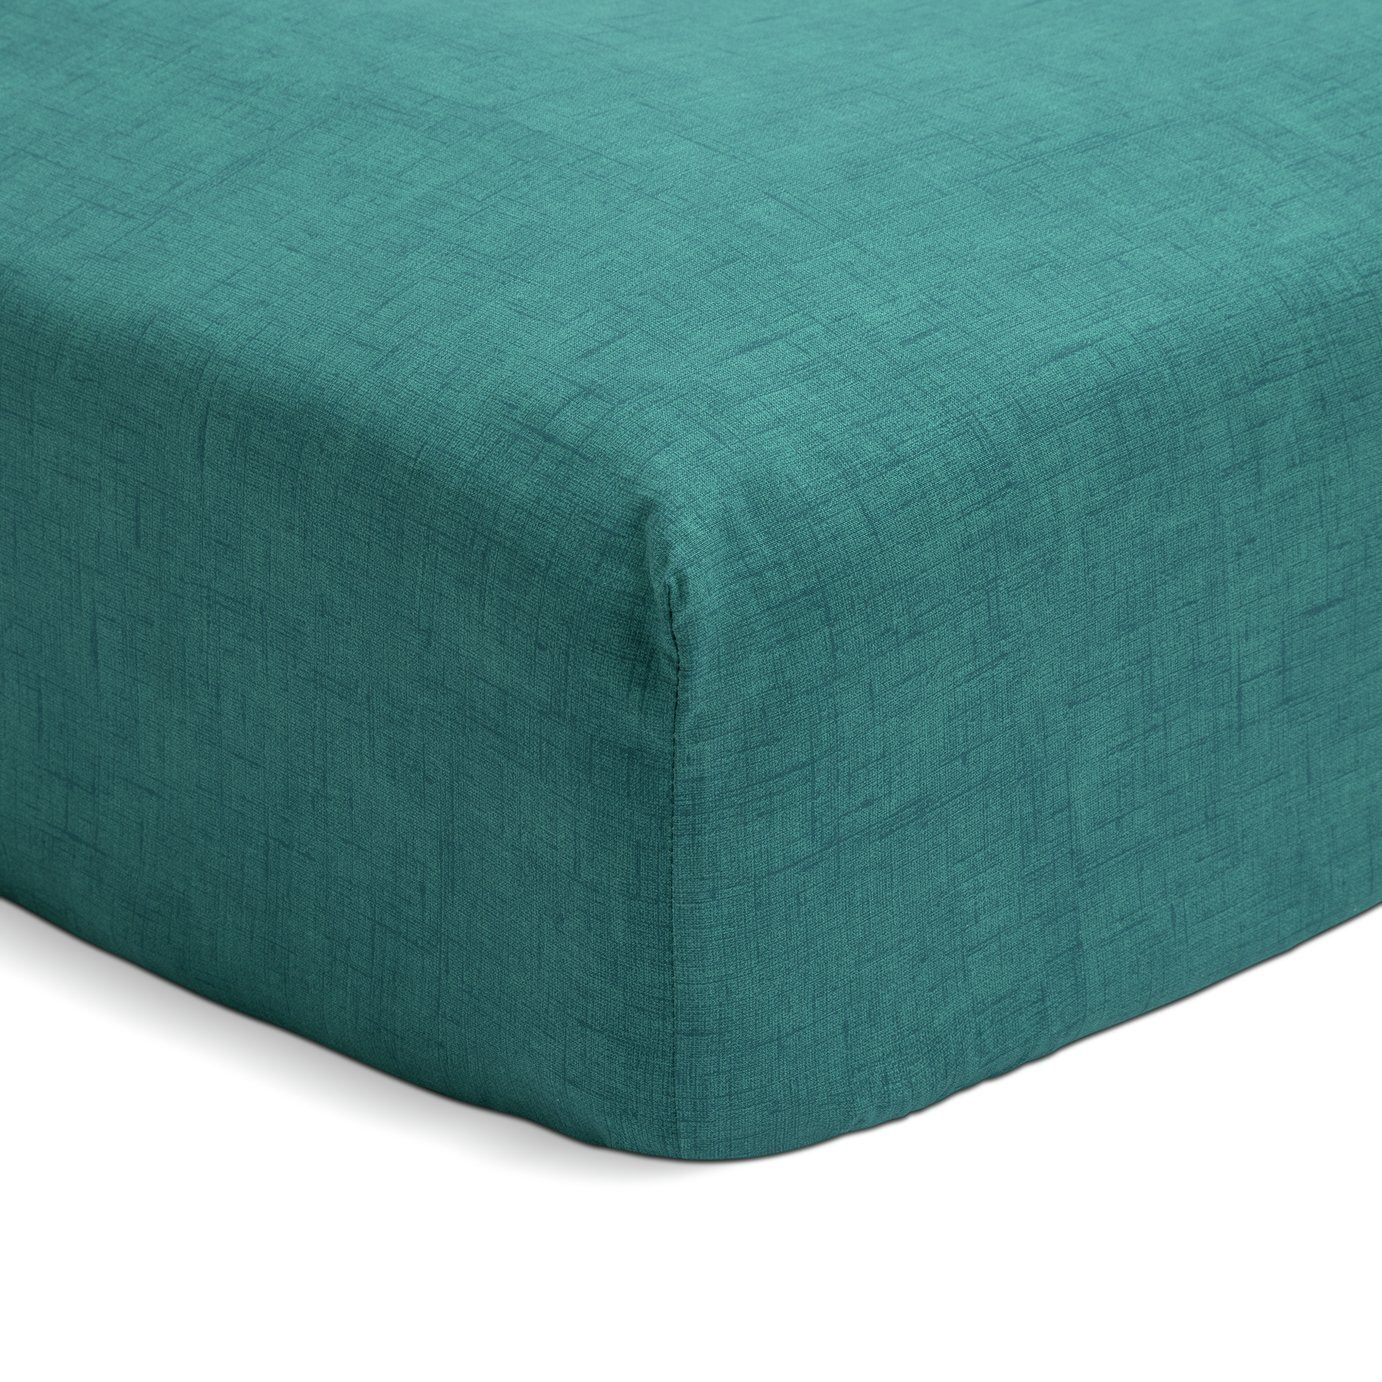 Habitat Texture Printed Teal Fitted Sheet - Single - image 1